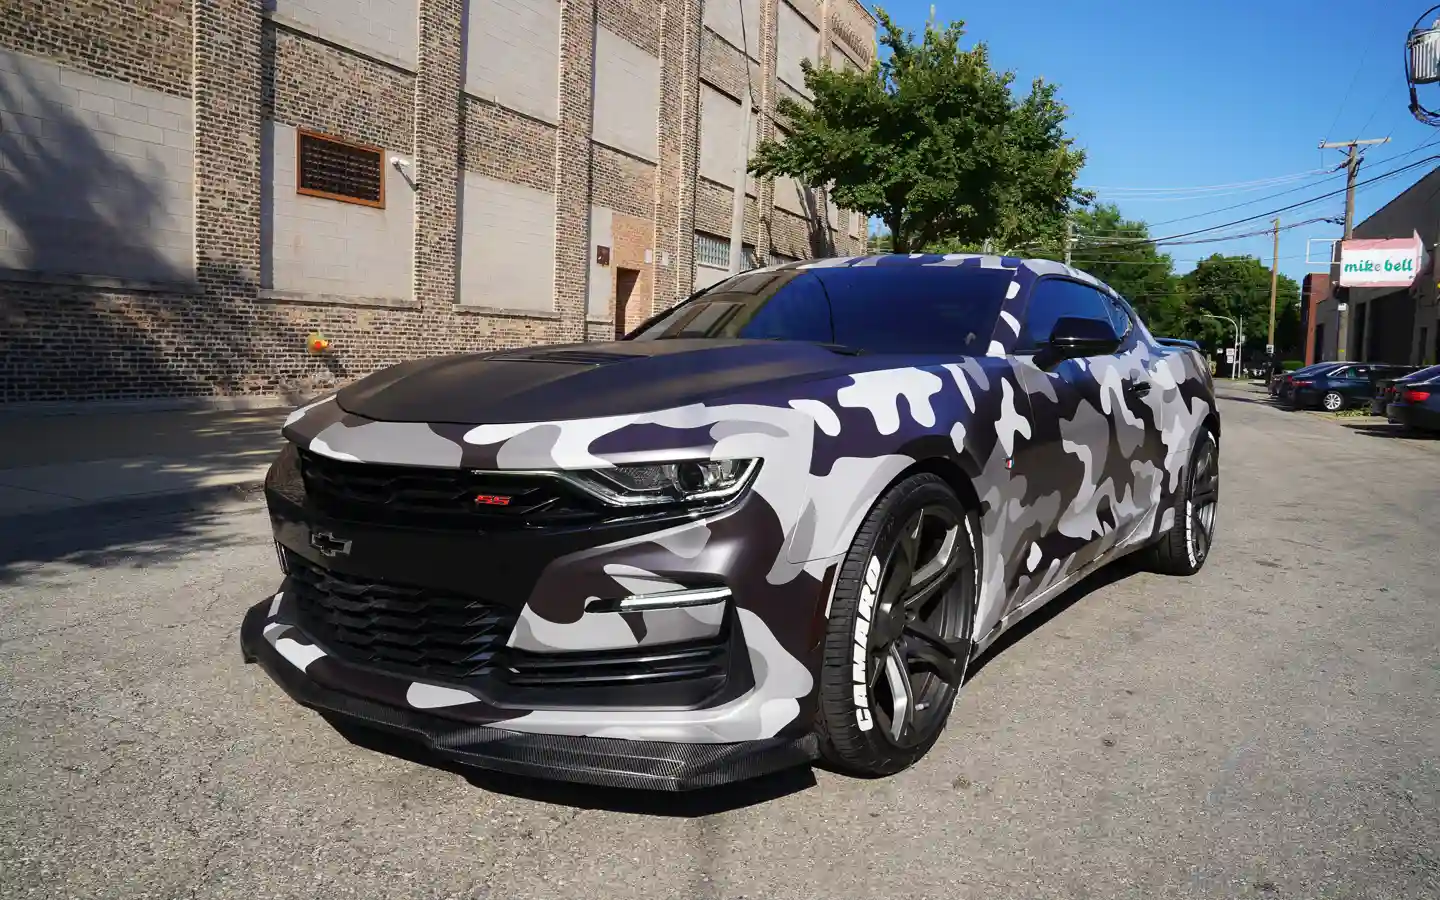 Arctic Camo Vinyl Wrapping Stickers Car Foil Wrap Camouflage Film